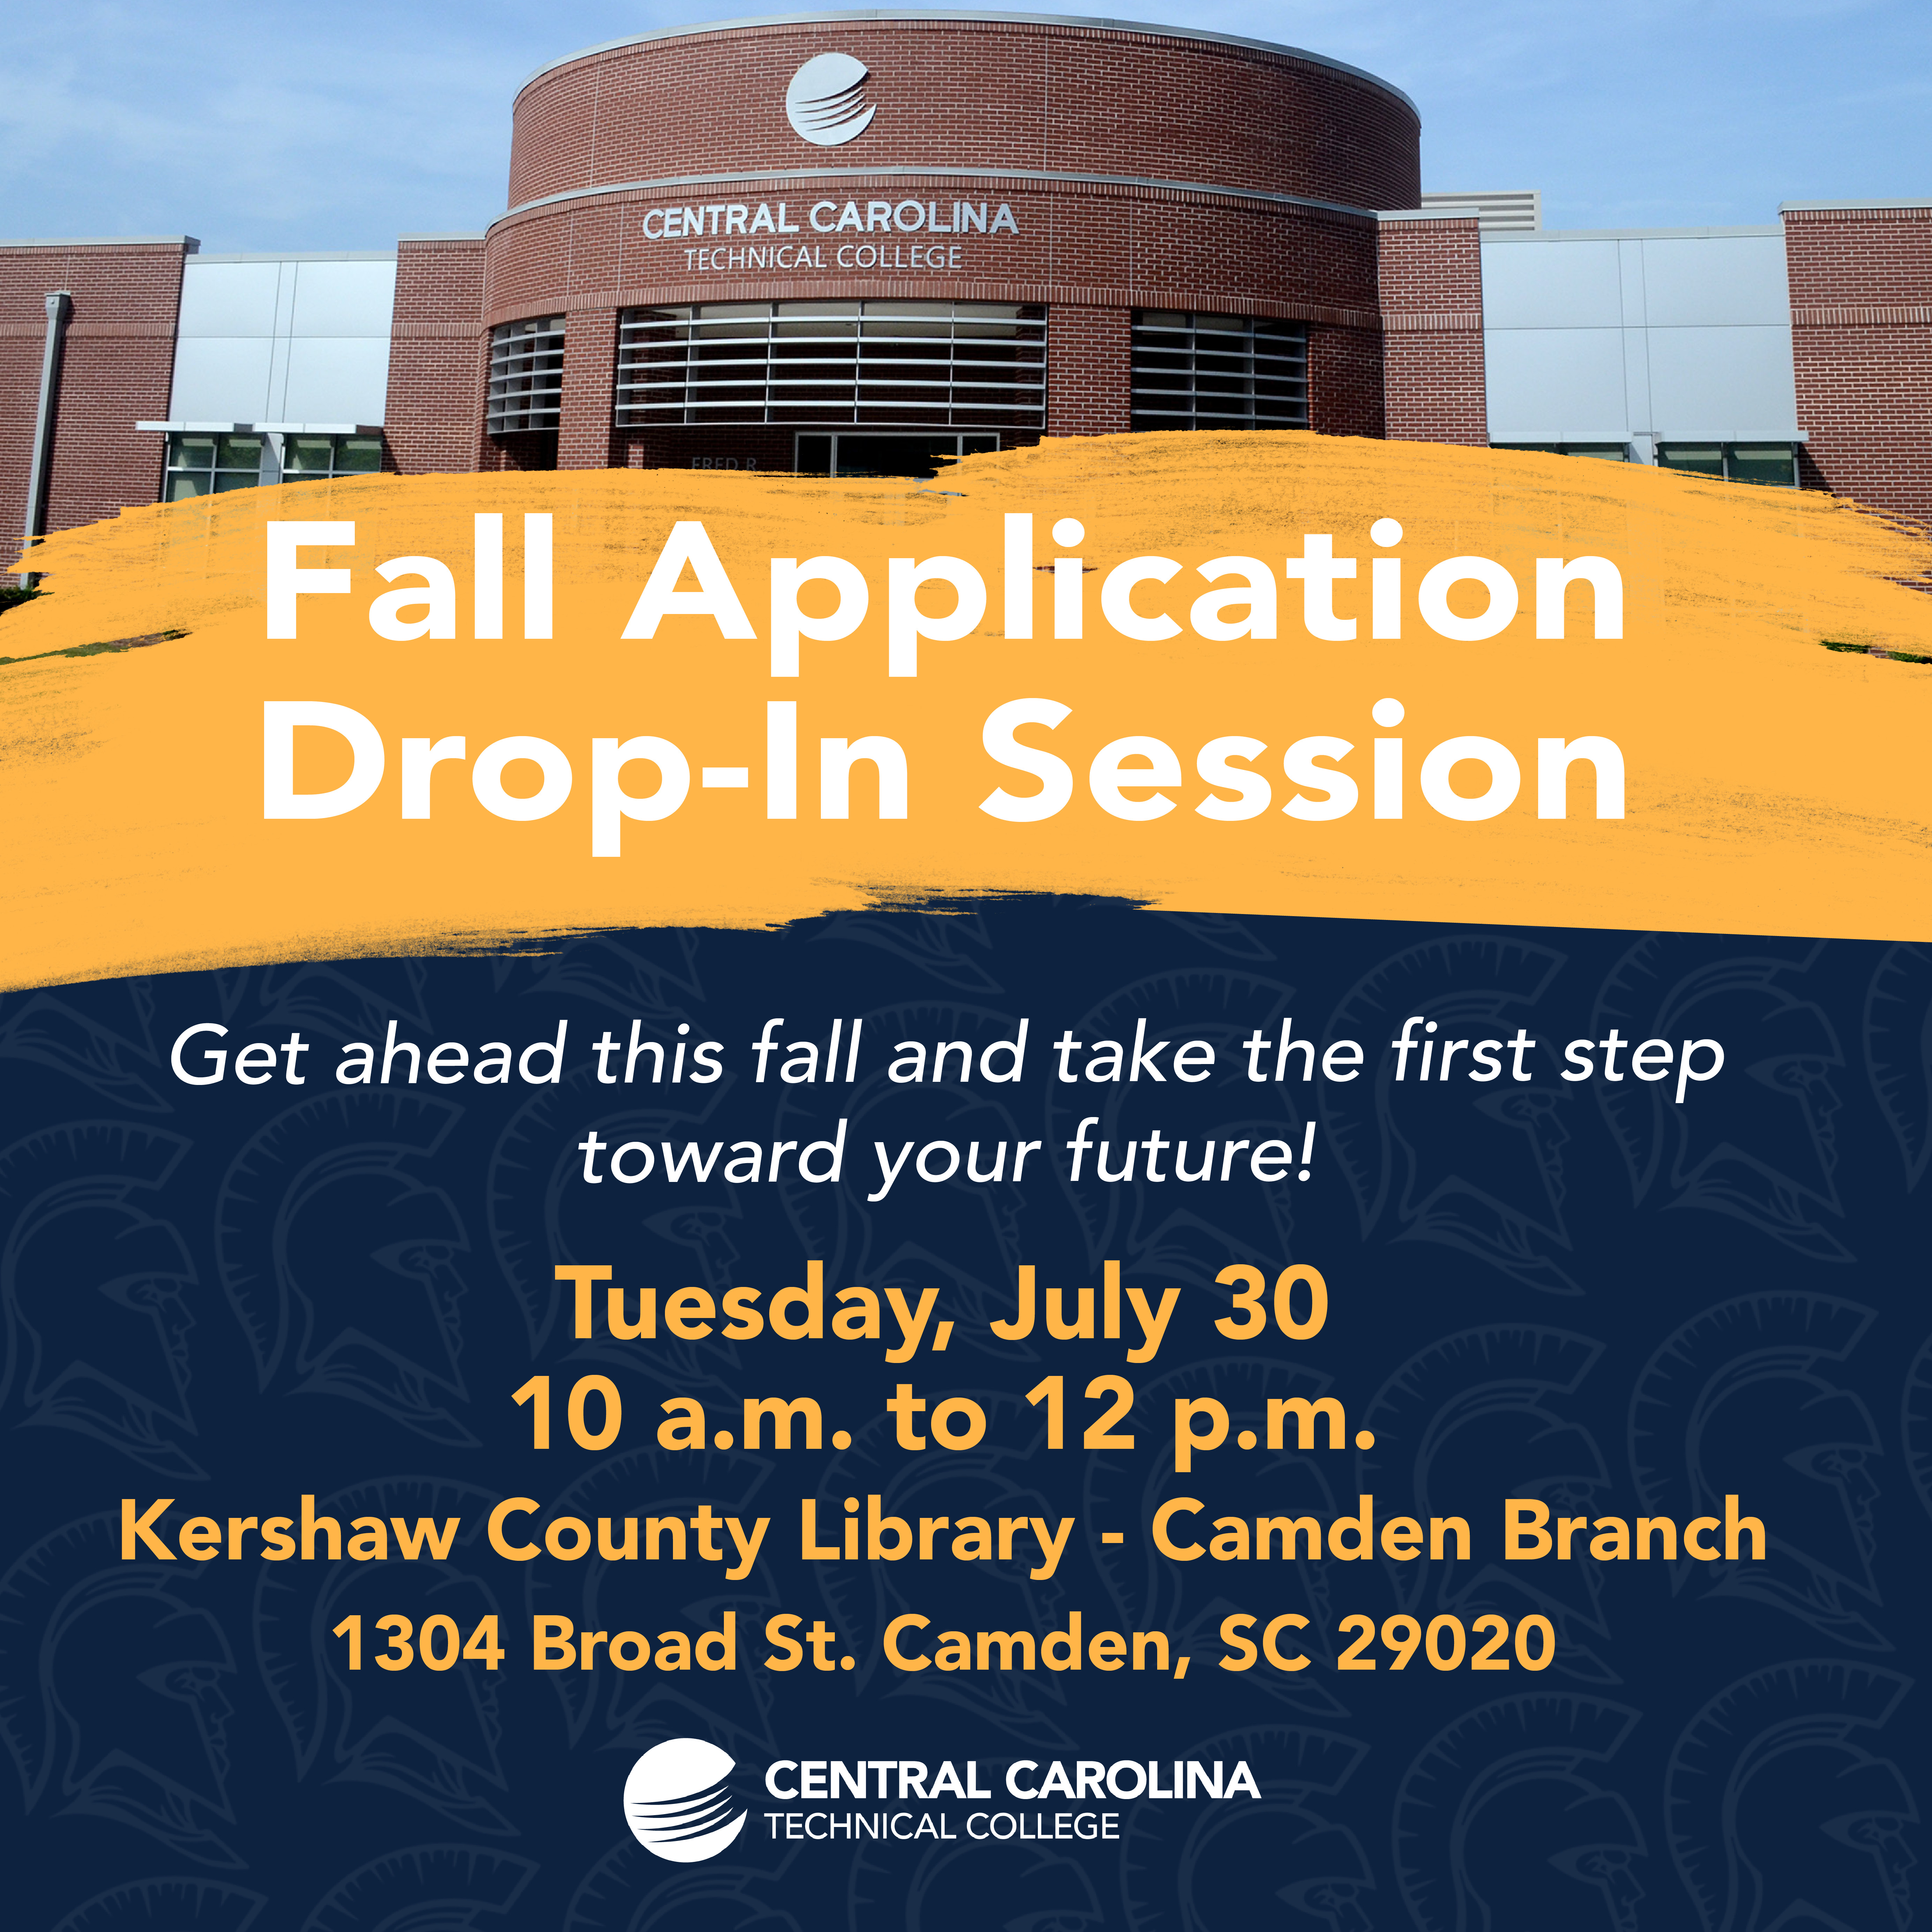 Fall Application Drop-In Session on July 30 from 10 am to 12 pm at the Kershaw County Library - Camden Branch.